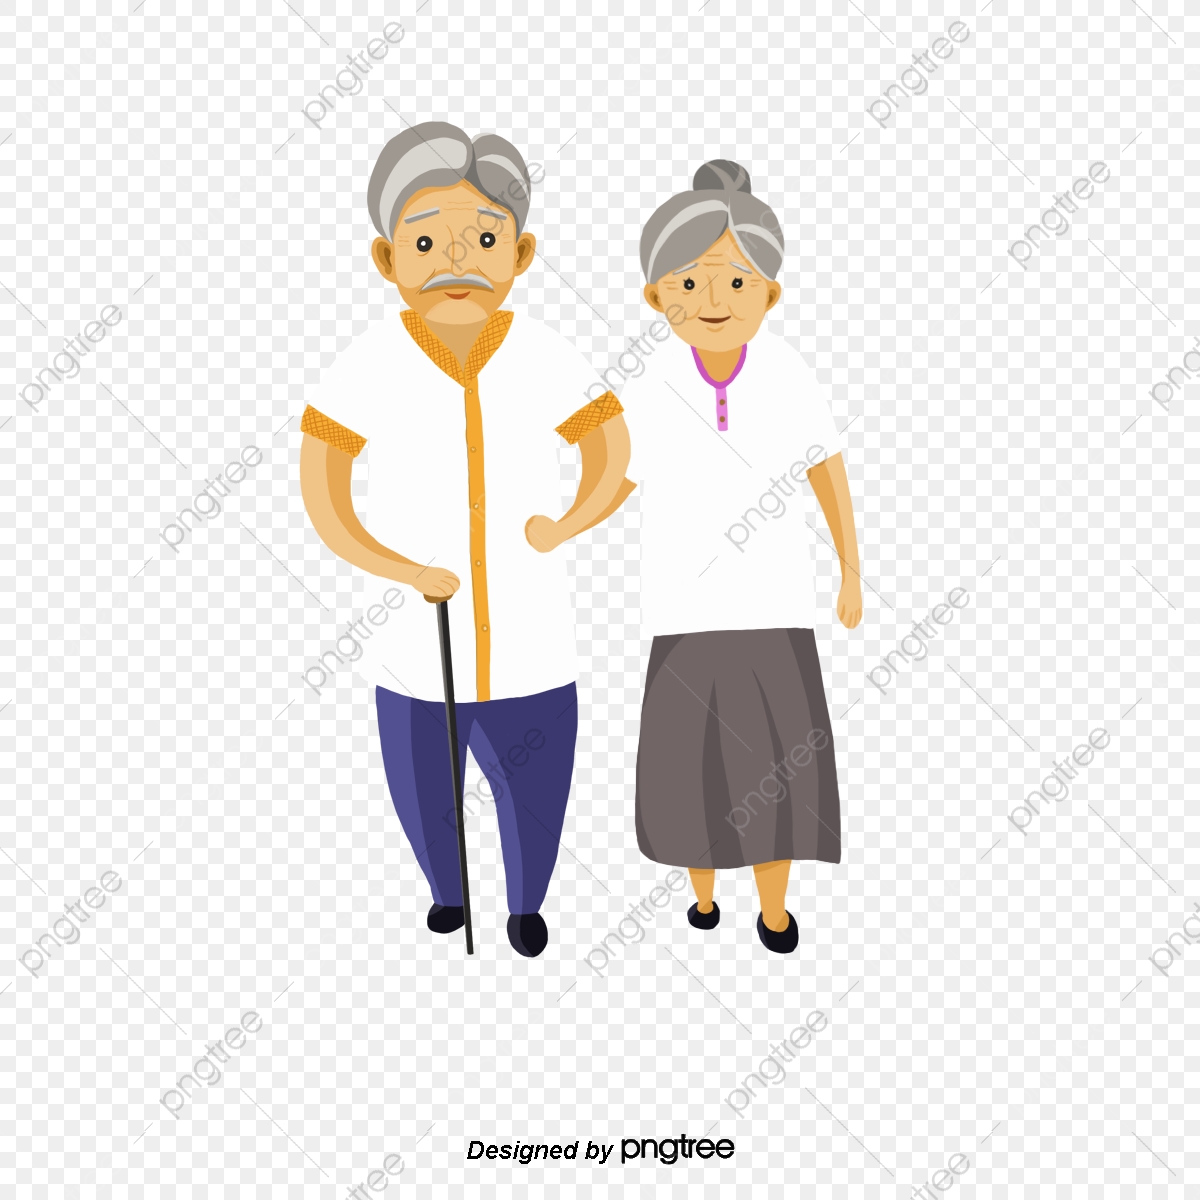 A Pair Of Old People, People Clipart, Old Couple, The Elderly PNG.